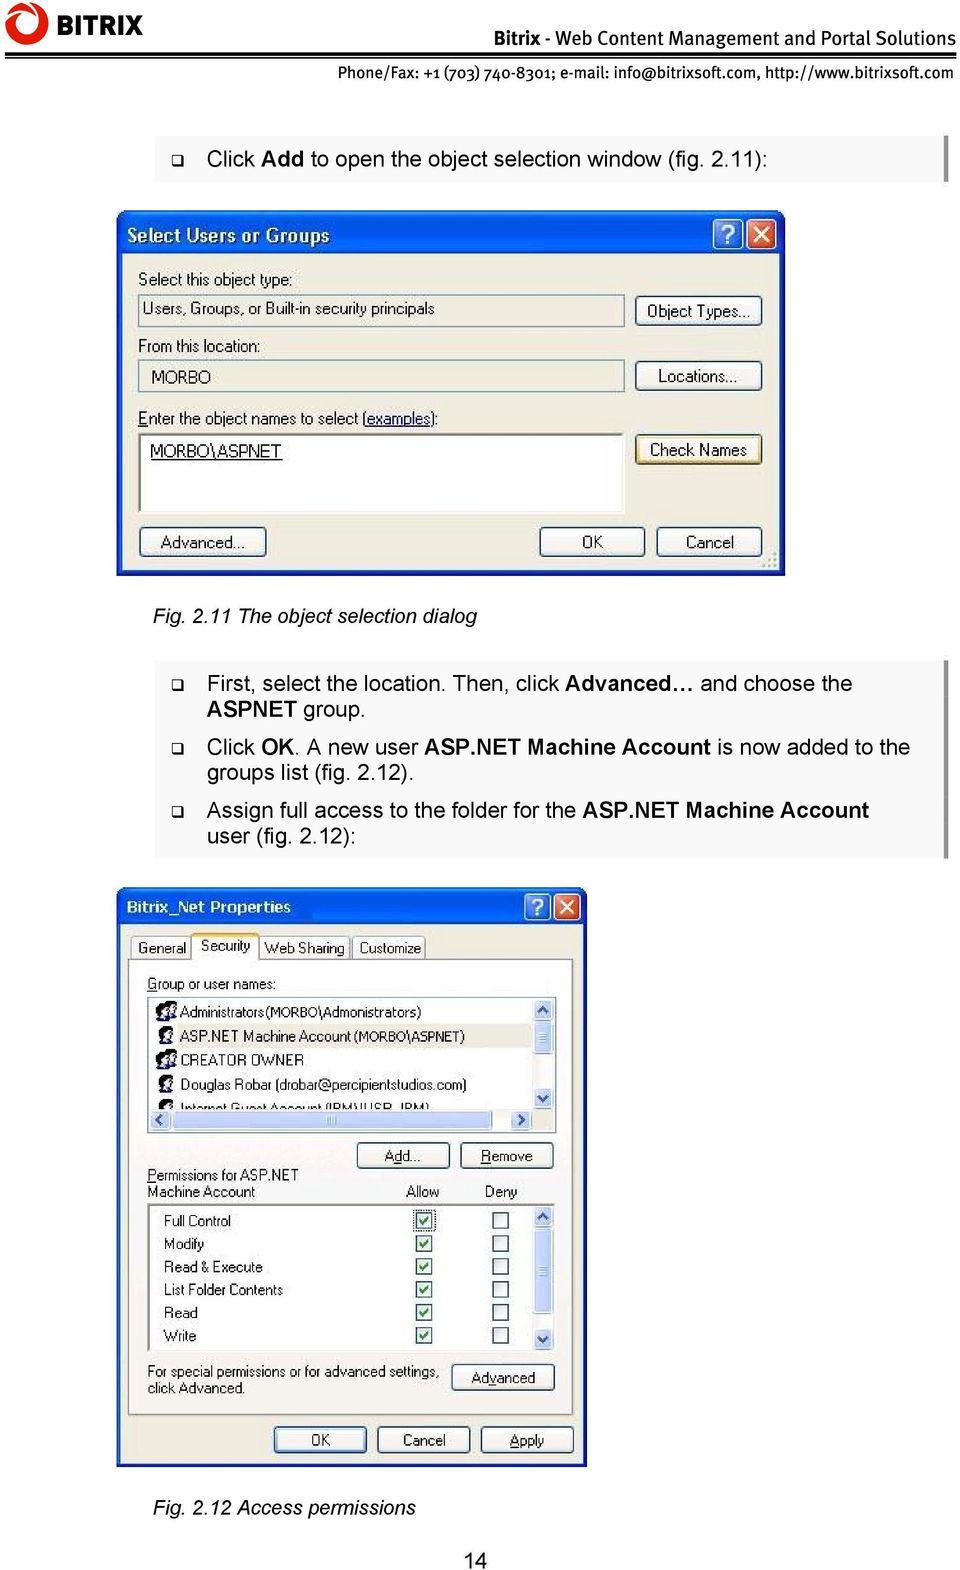 Then, click Advanced and choose the ASPNET group. Click OK. A new user ASP.